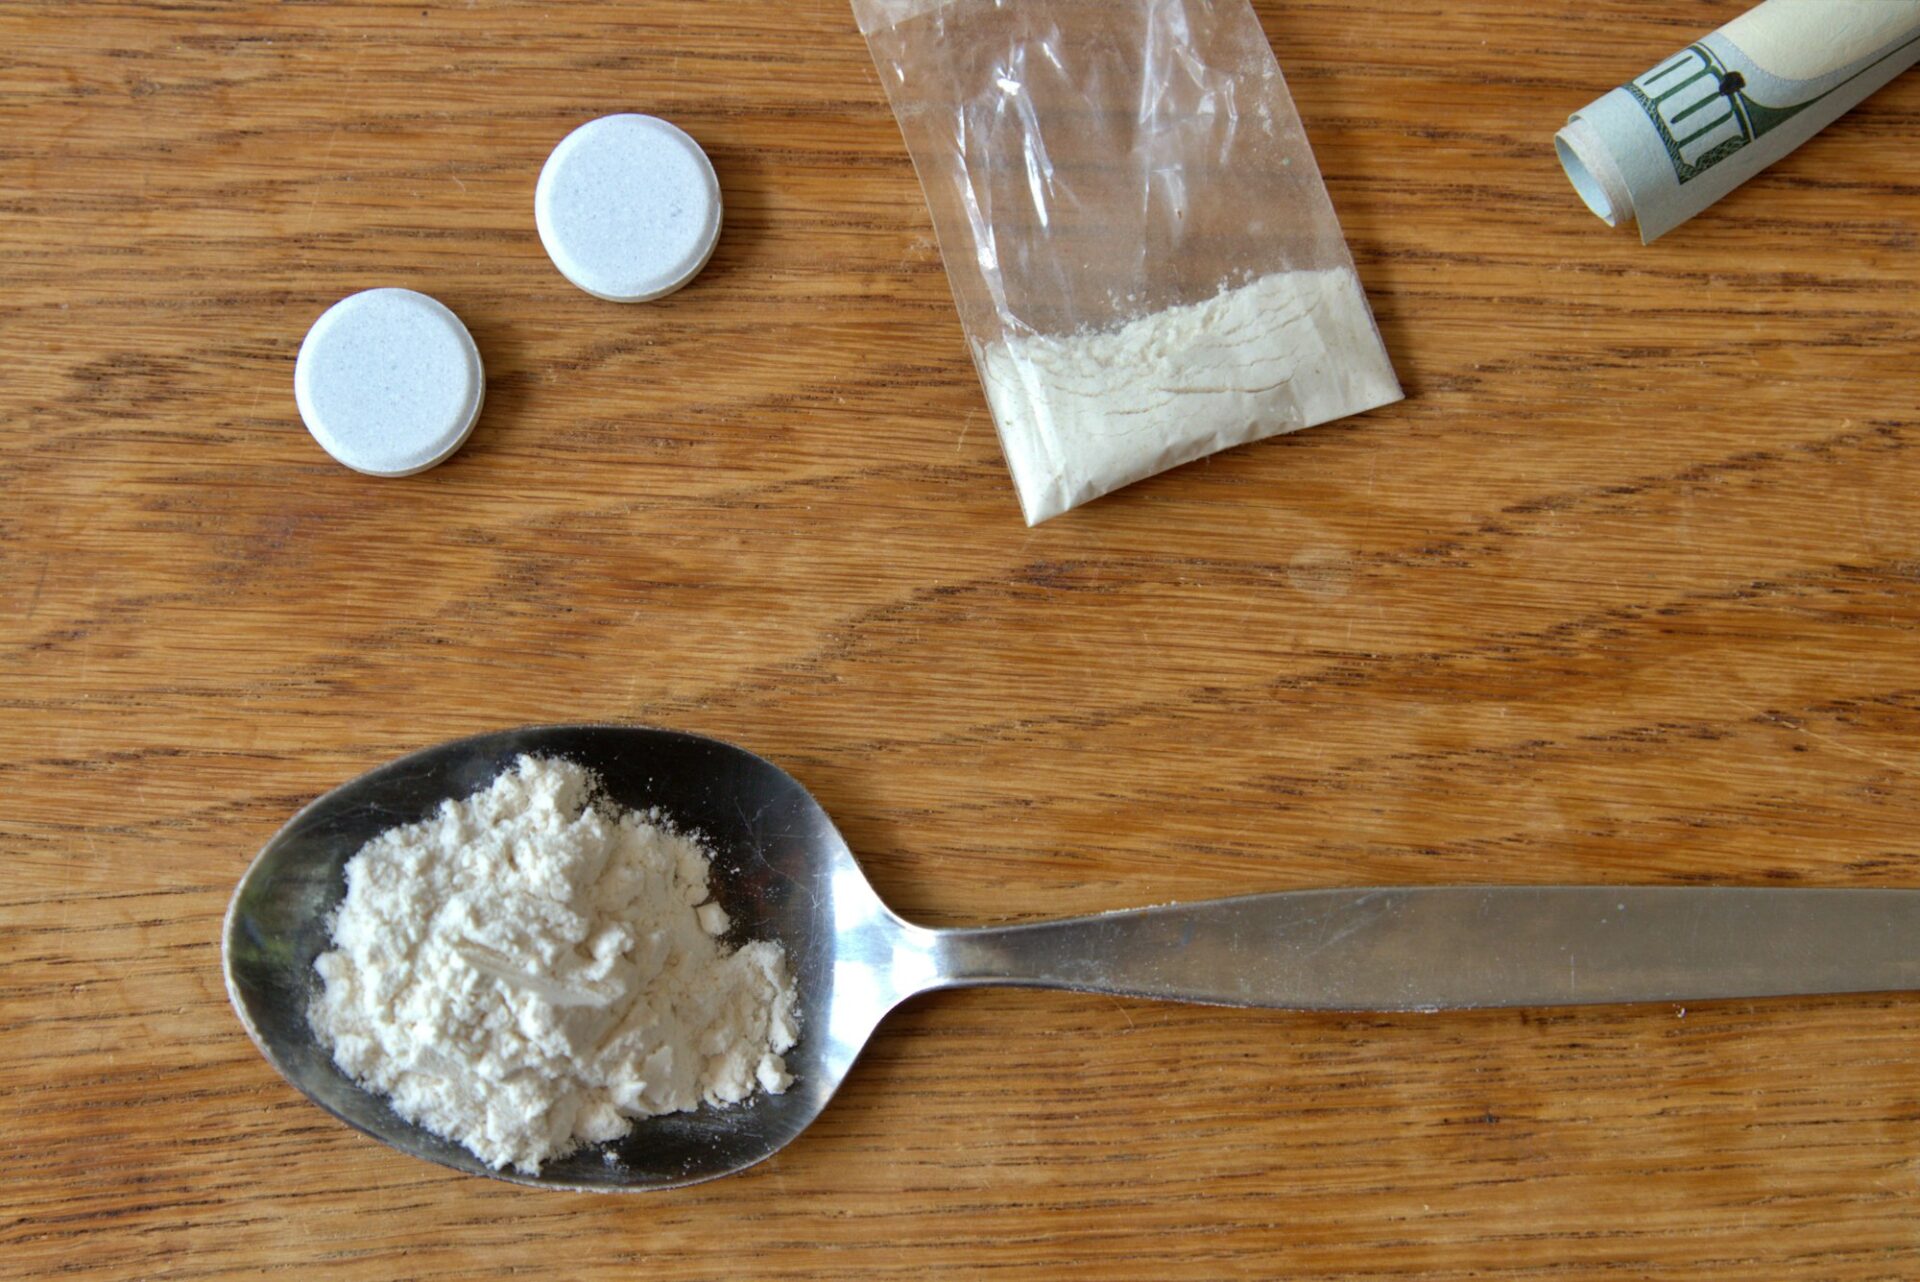 Drugs laid out on a table